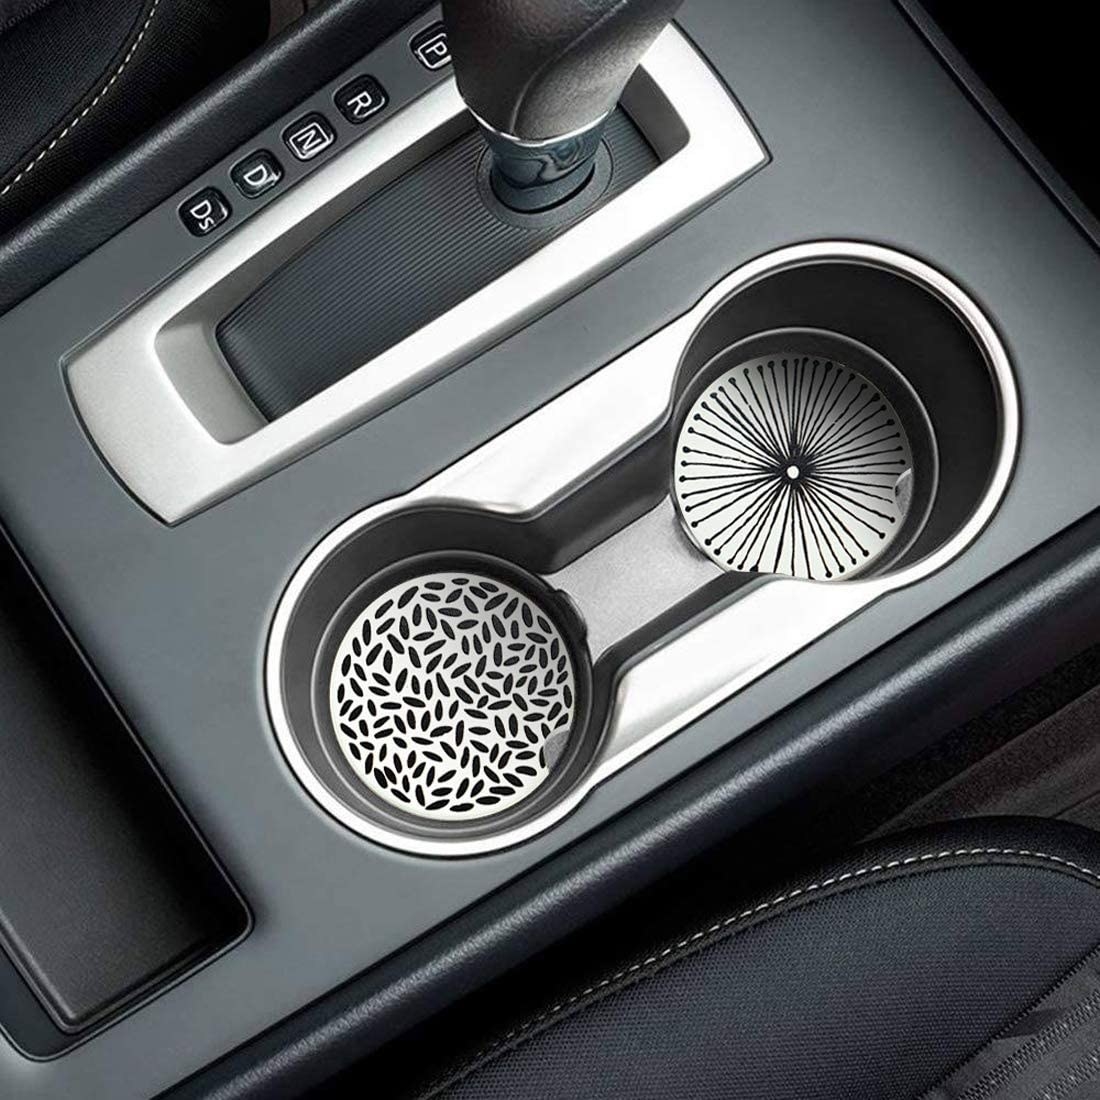 Two patterned coasters inside of a car cupholder